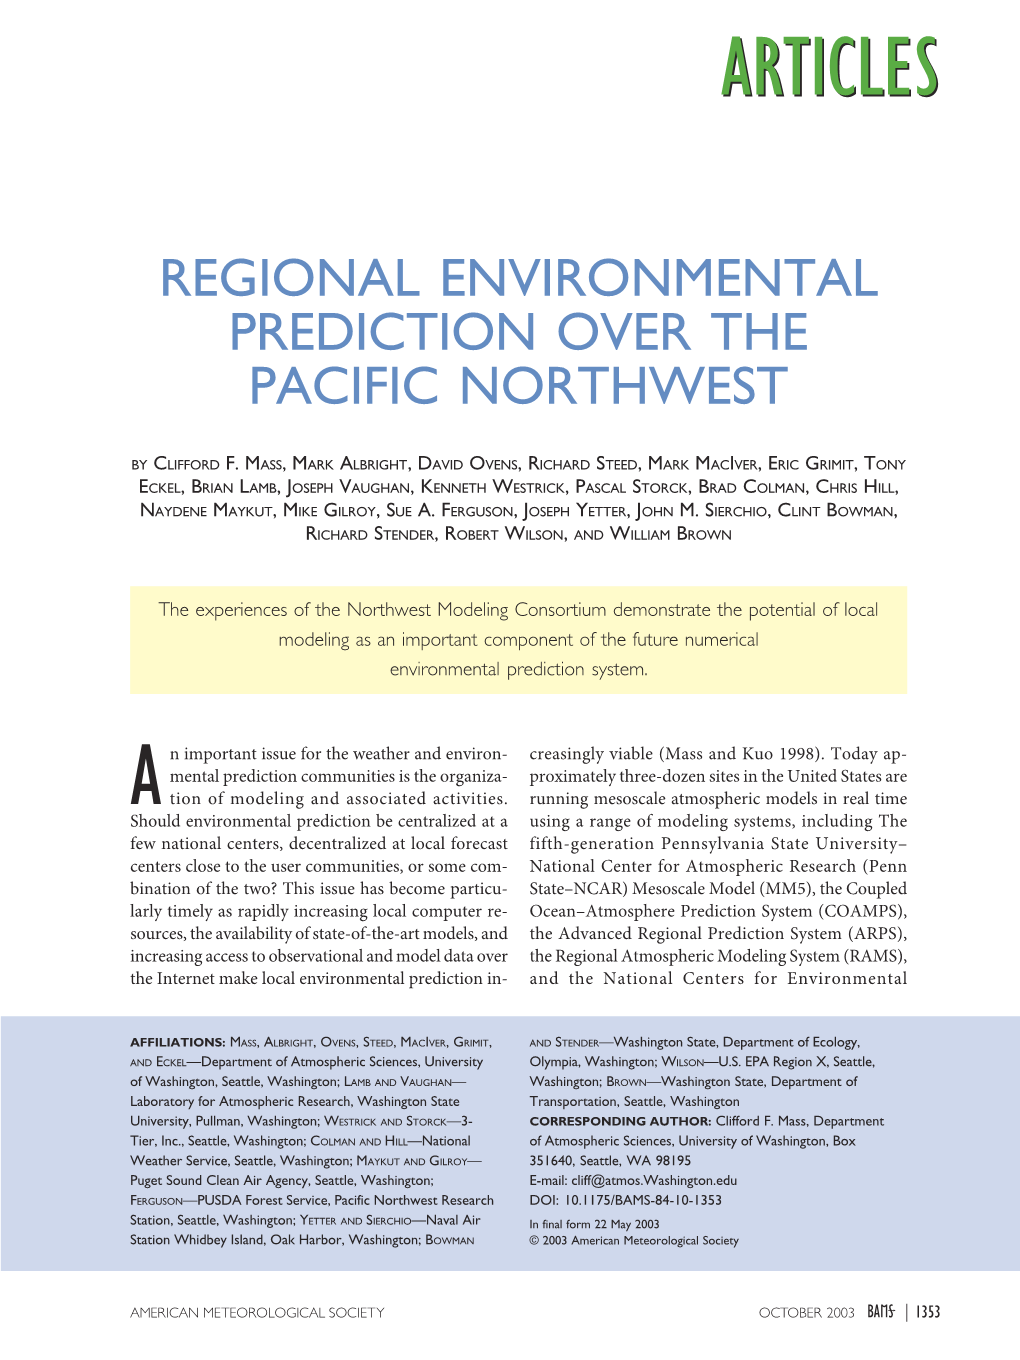 Regional Environmental Prediction Over the Pacific Northwest